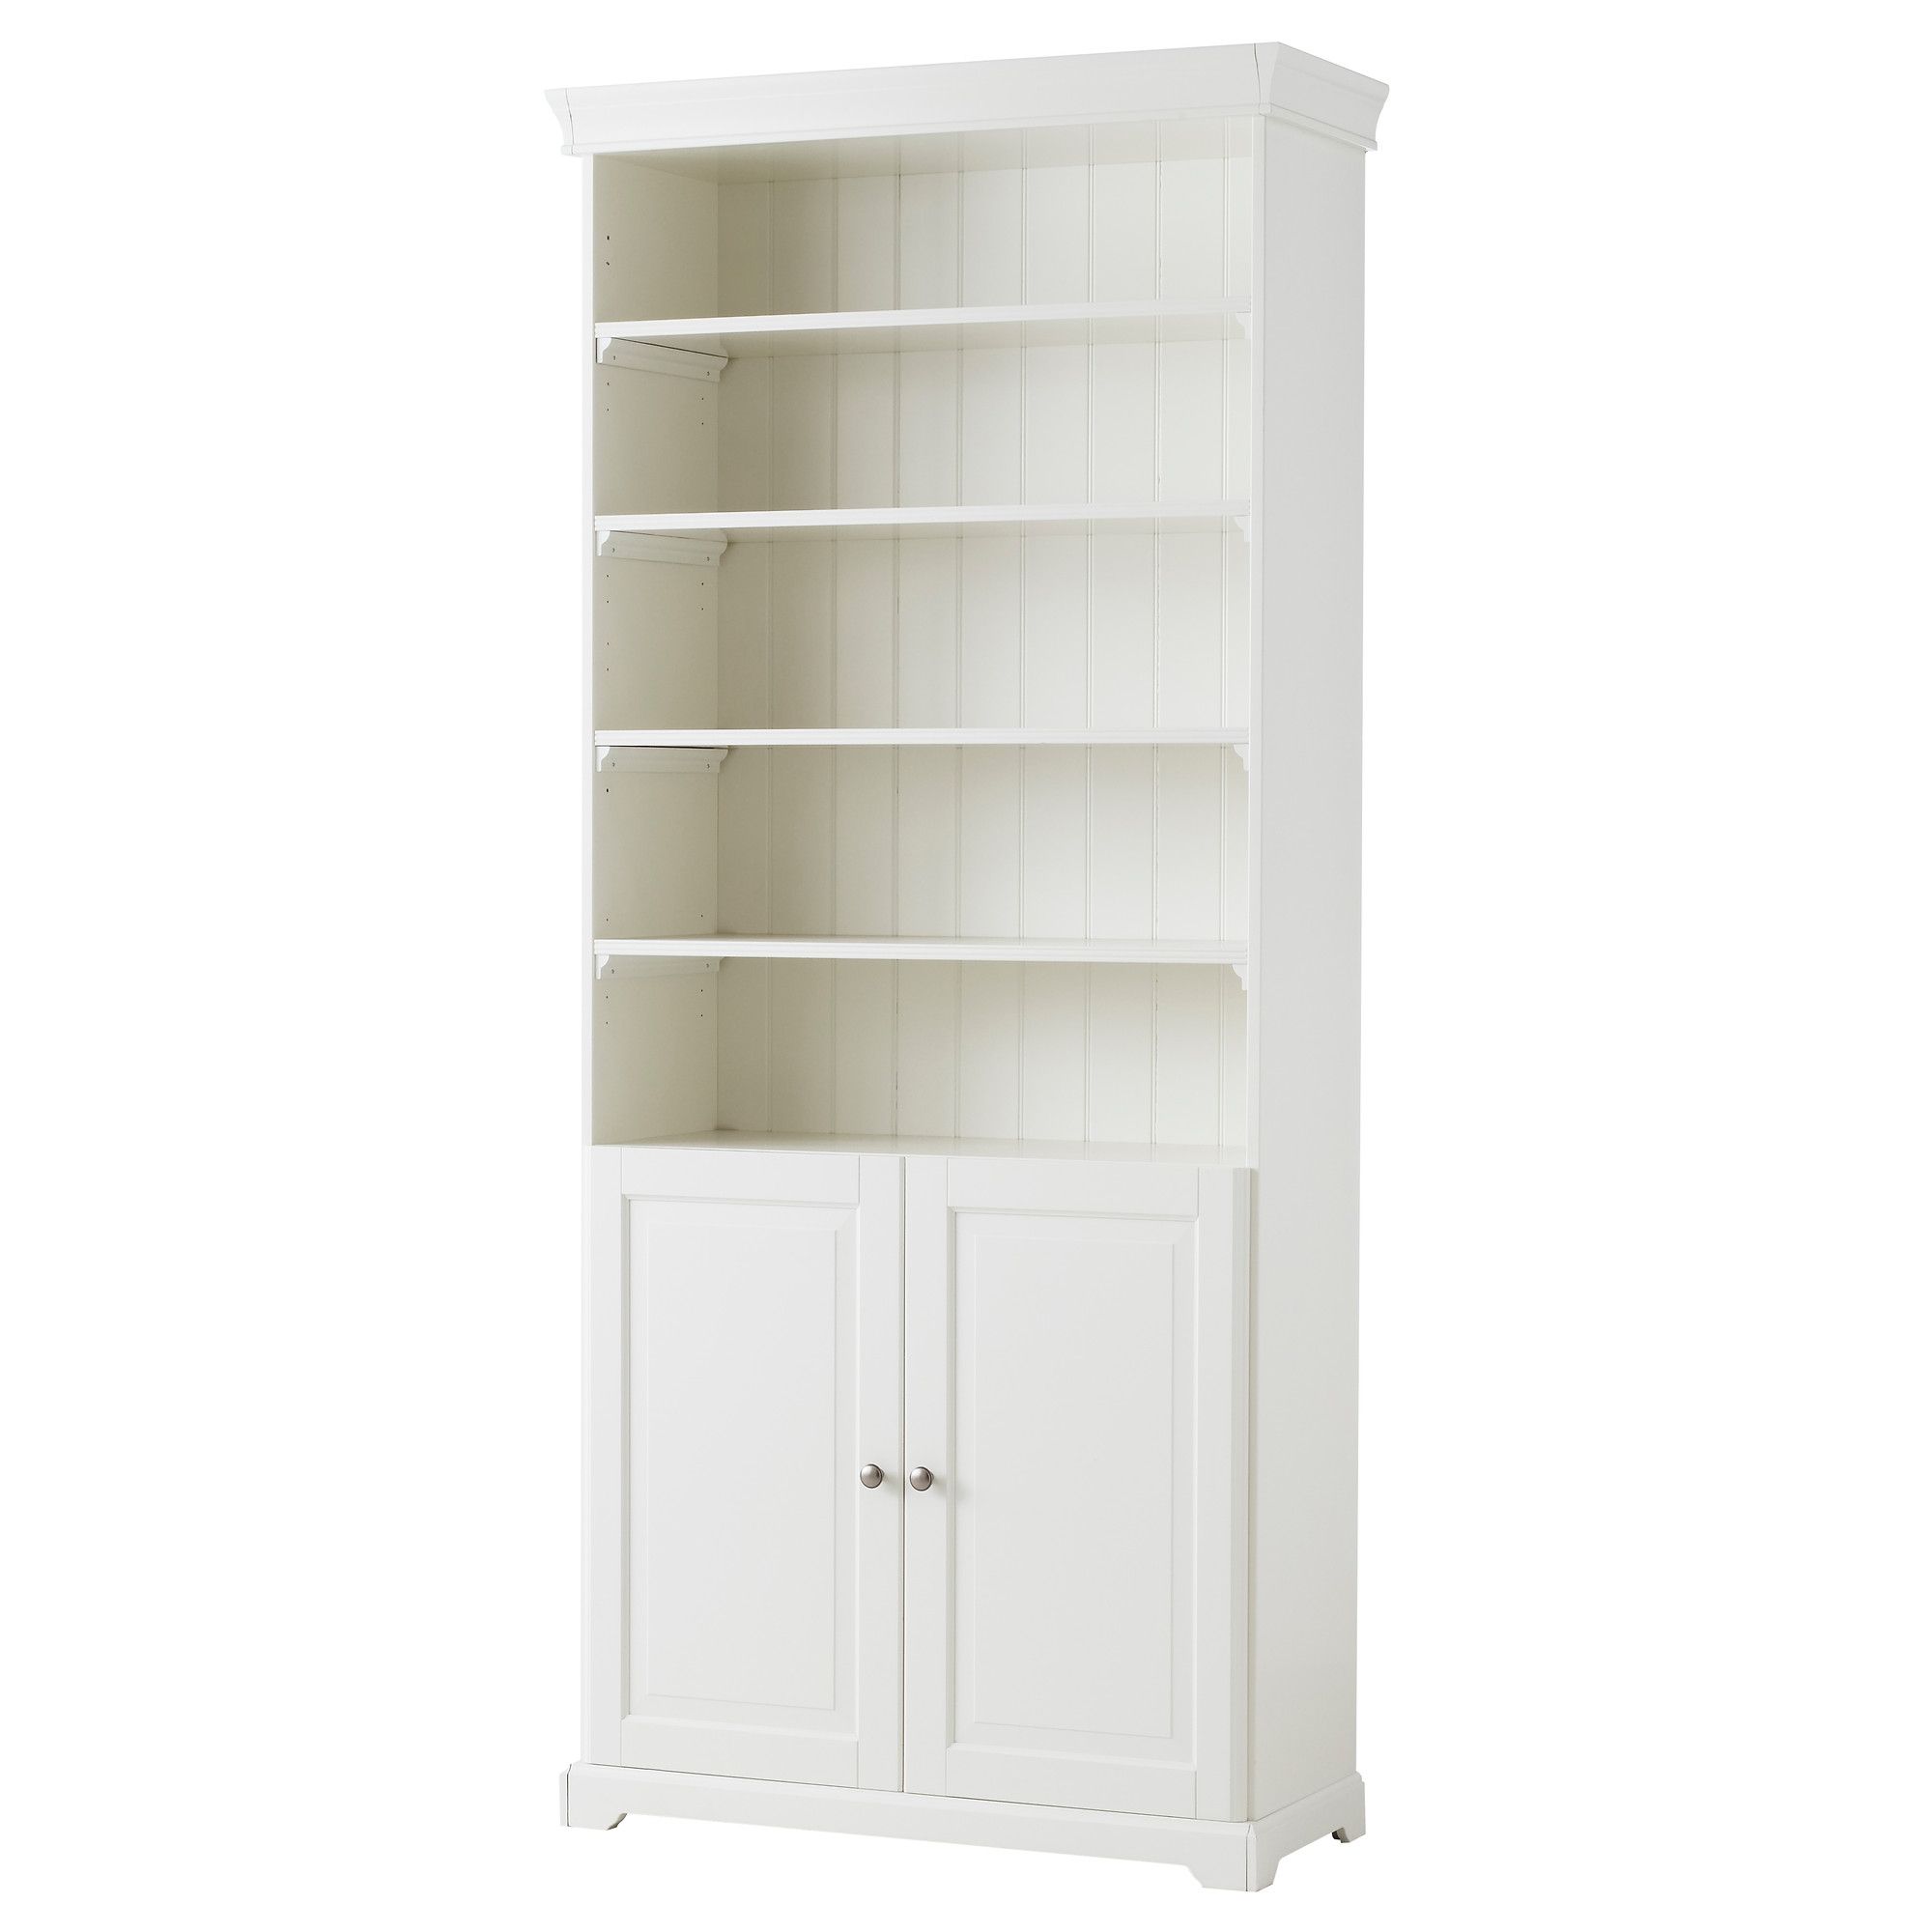 Liatorp Bookcase Ikea White Width 37 34 Depth 14 58 For White Bookcase With Cupboard (View 9 of 15)